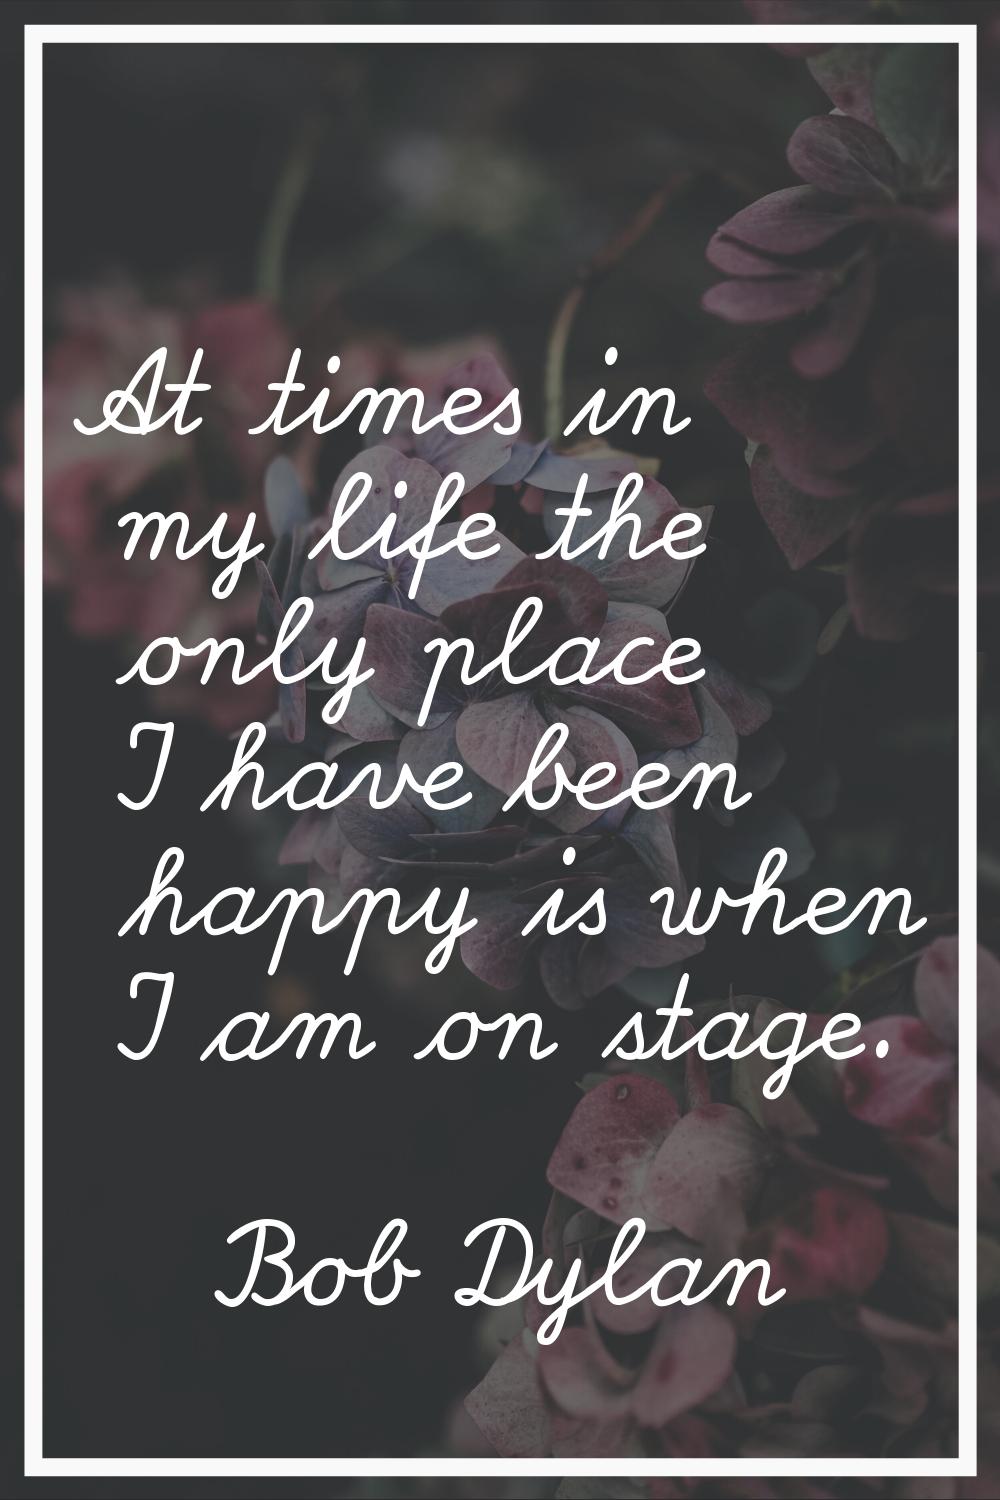 At times in my life the only place I have been happy is when I am on stage.